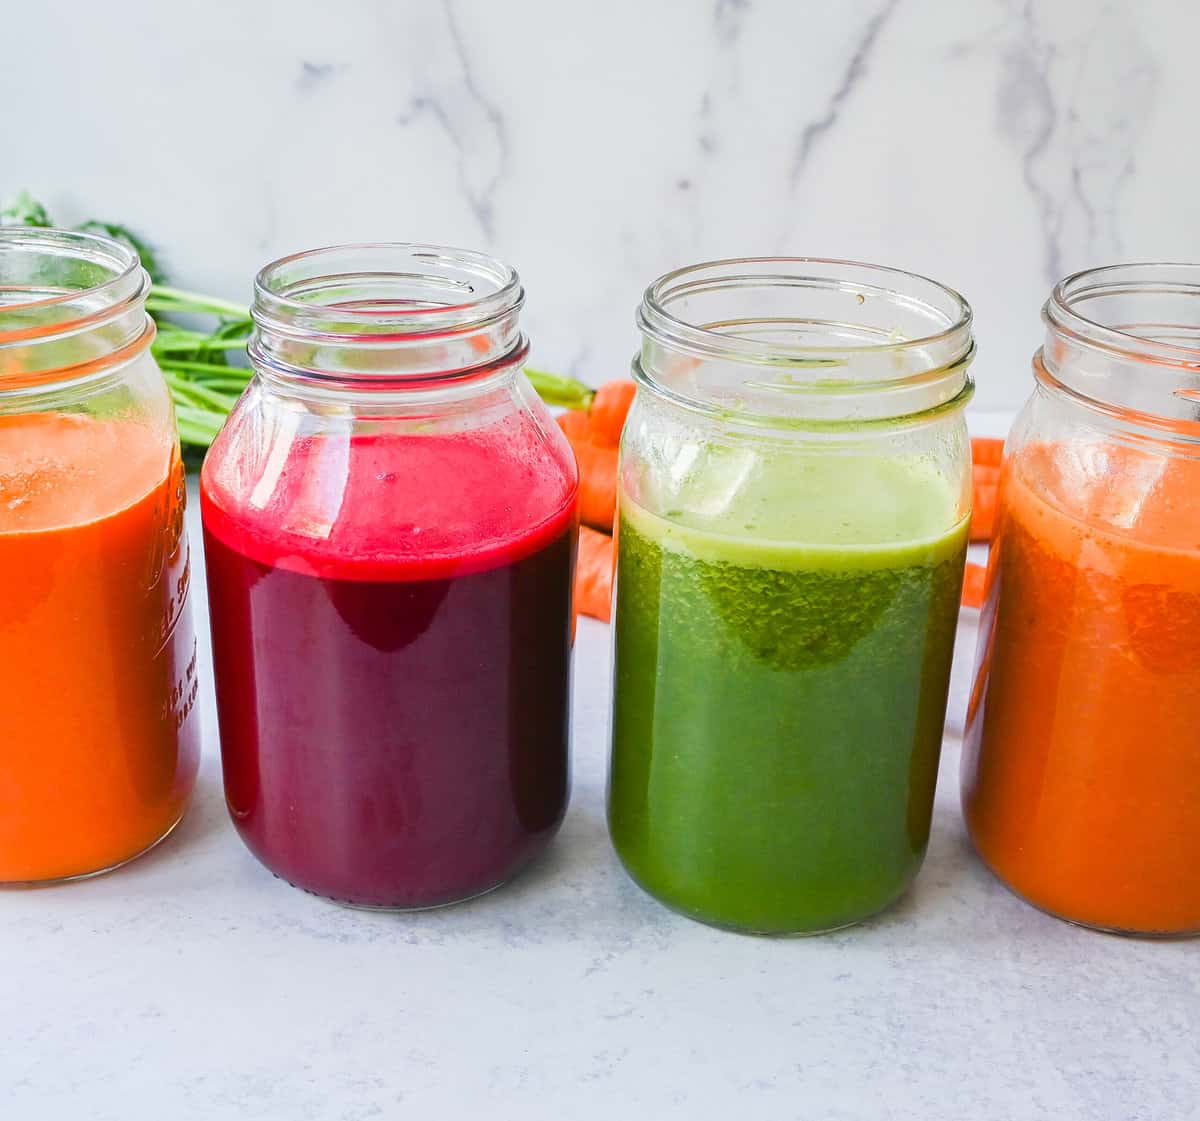 Four healthy juicing recipes to give your body natural energy and helps to detoxify the body! These are the best fresh juice recipes using fresh fruits and vegetables. Get started with juicing with the best juice recipes.